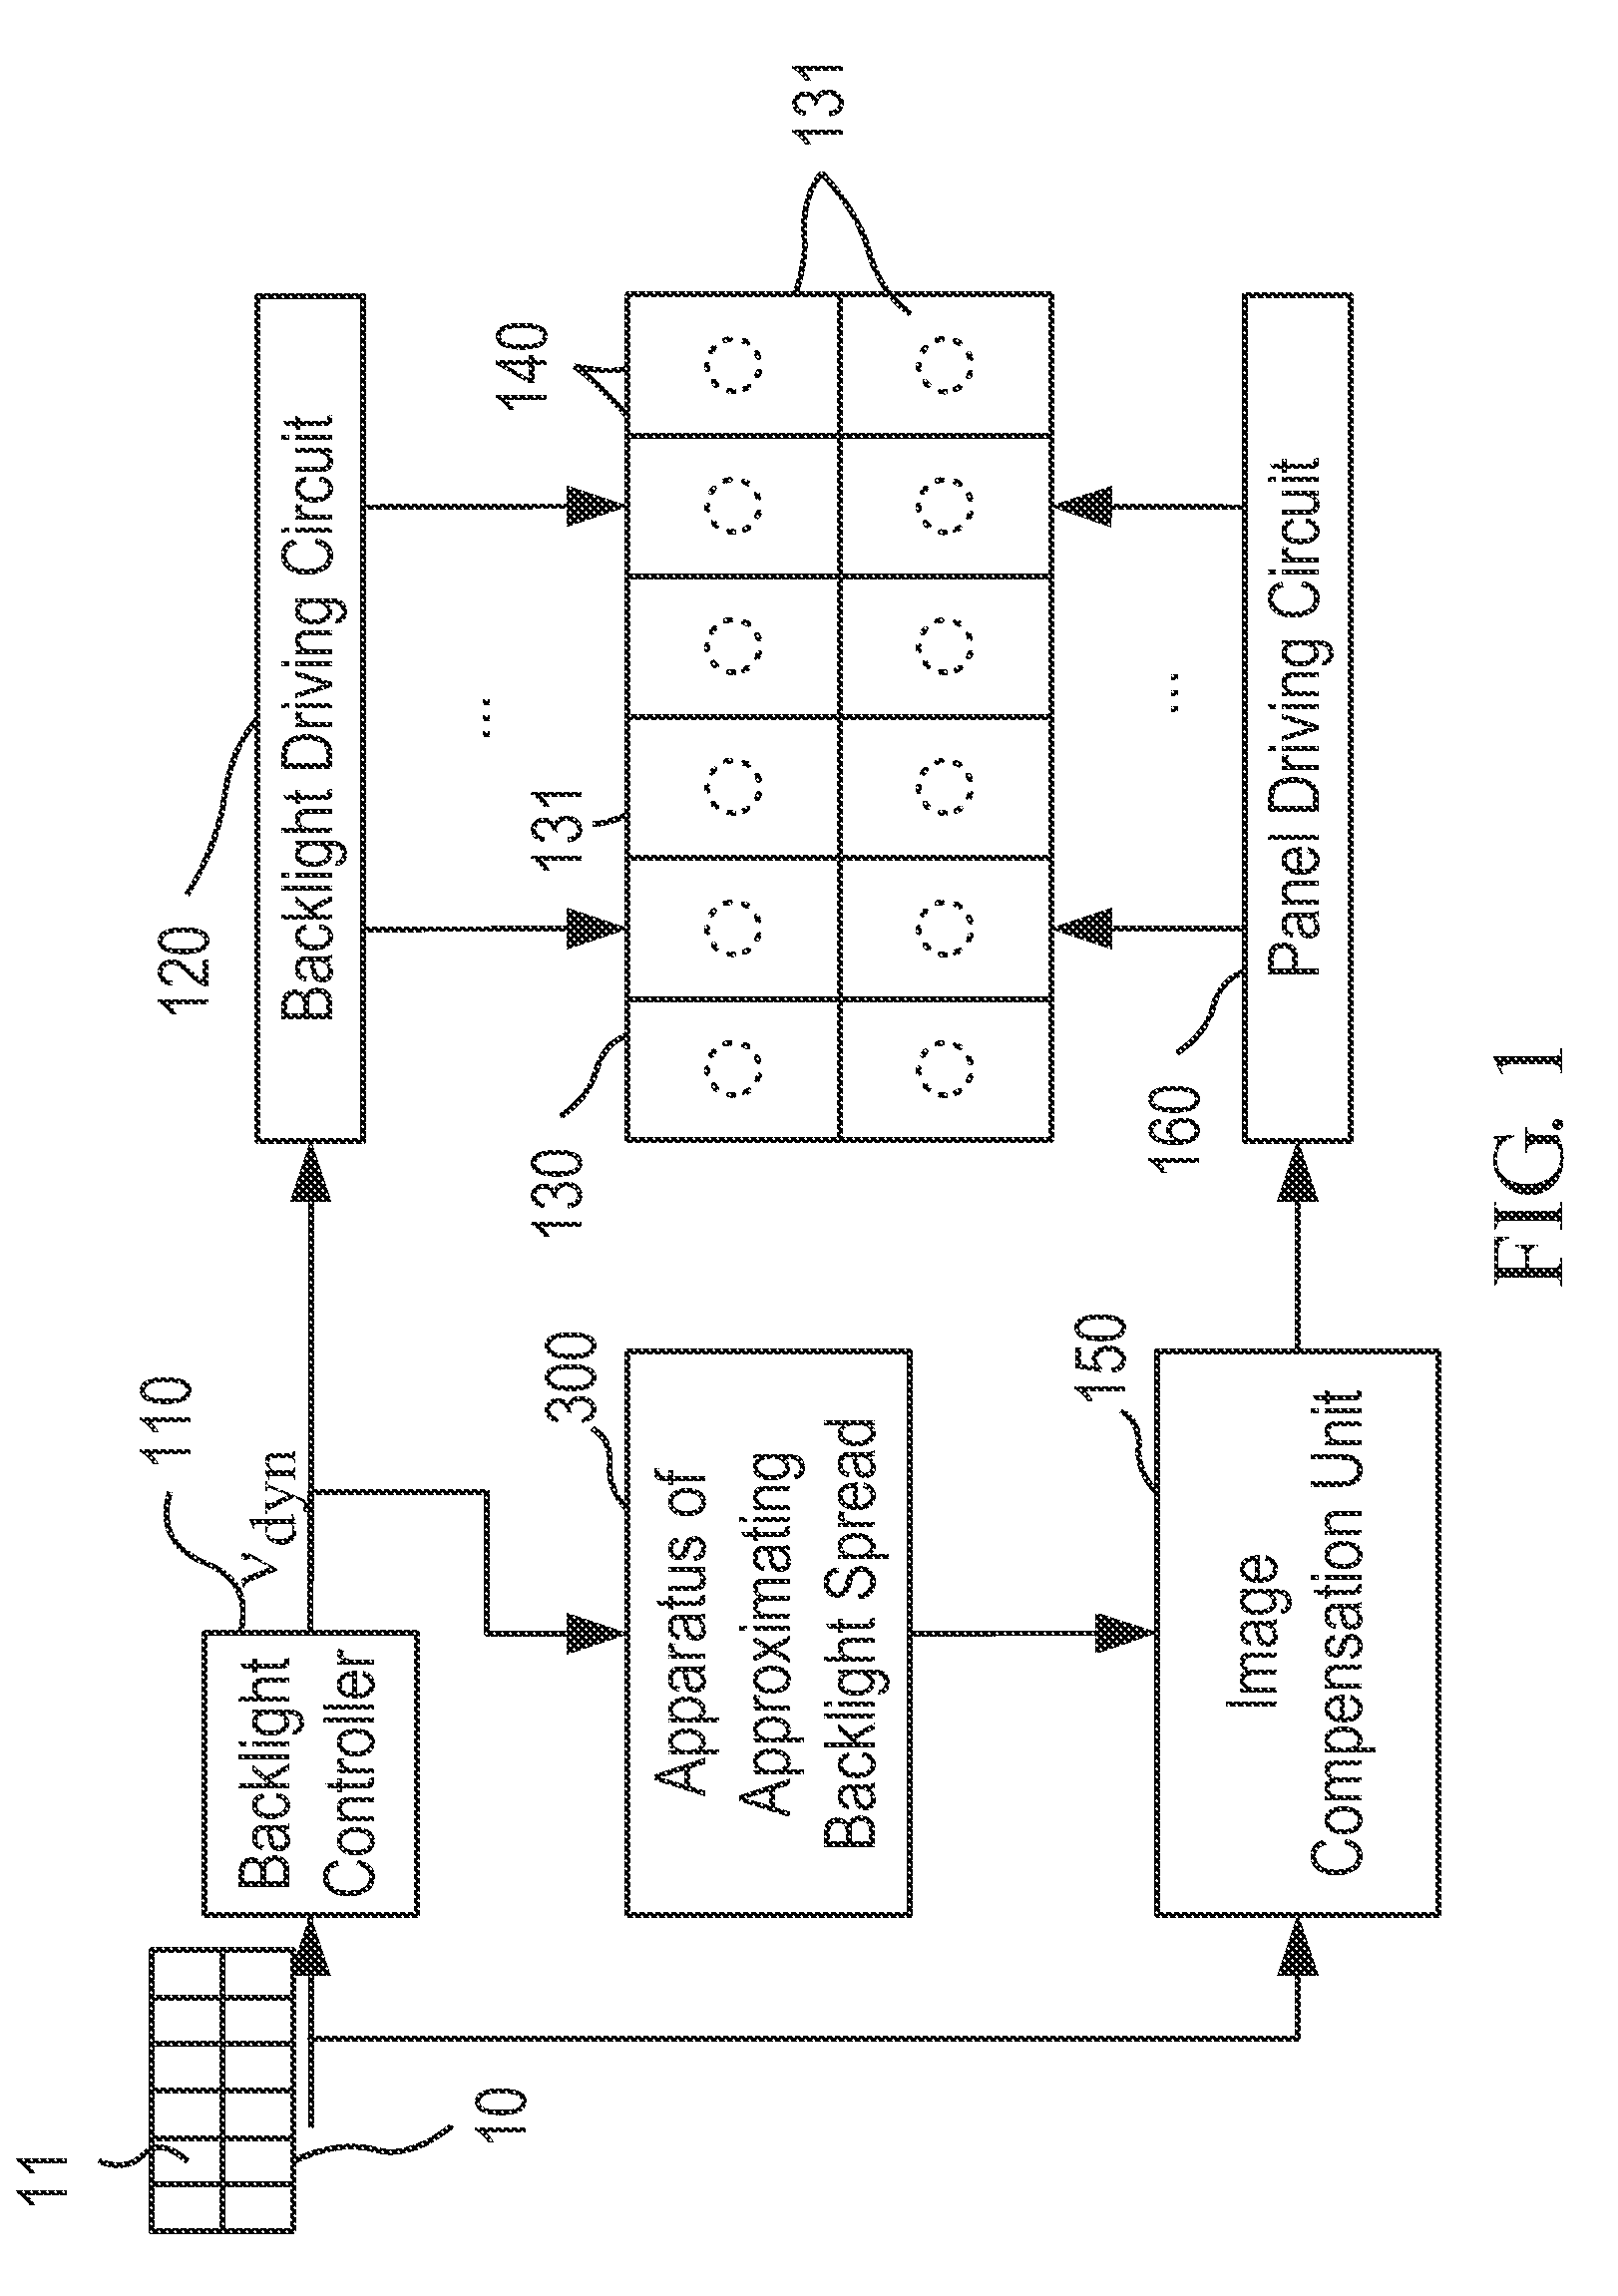 Method and apparatus of approximating backlight spread in a local dimming system